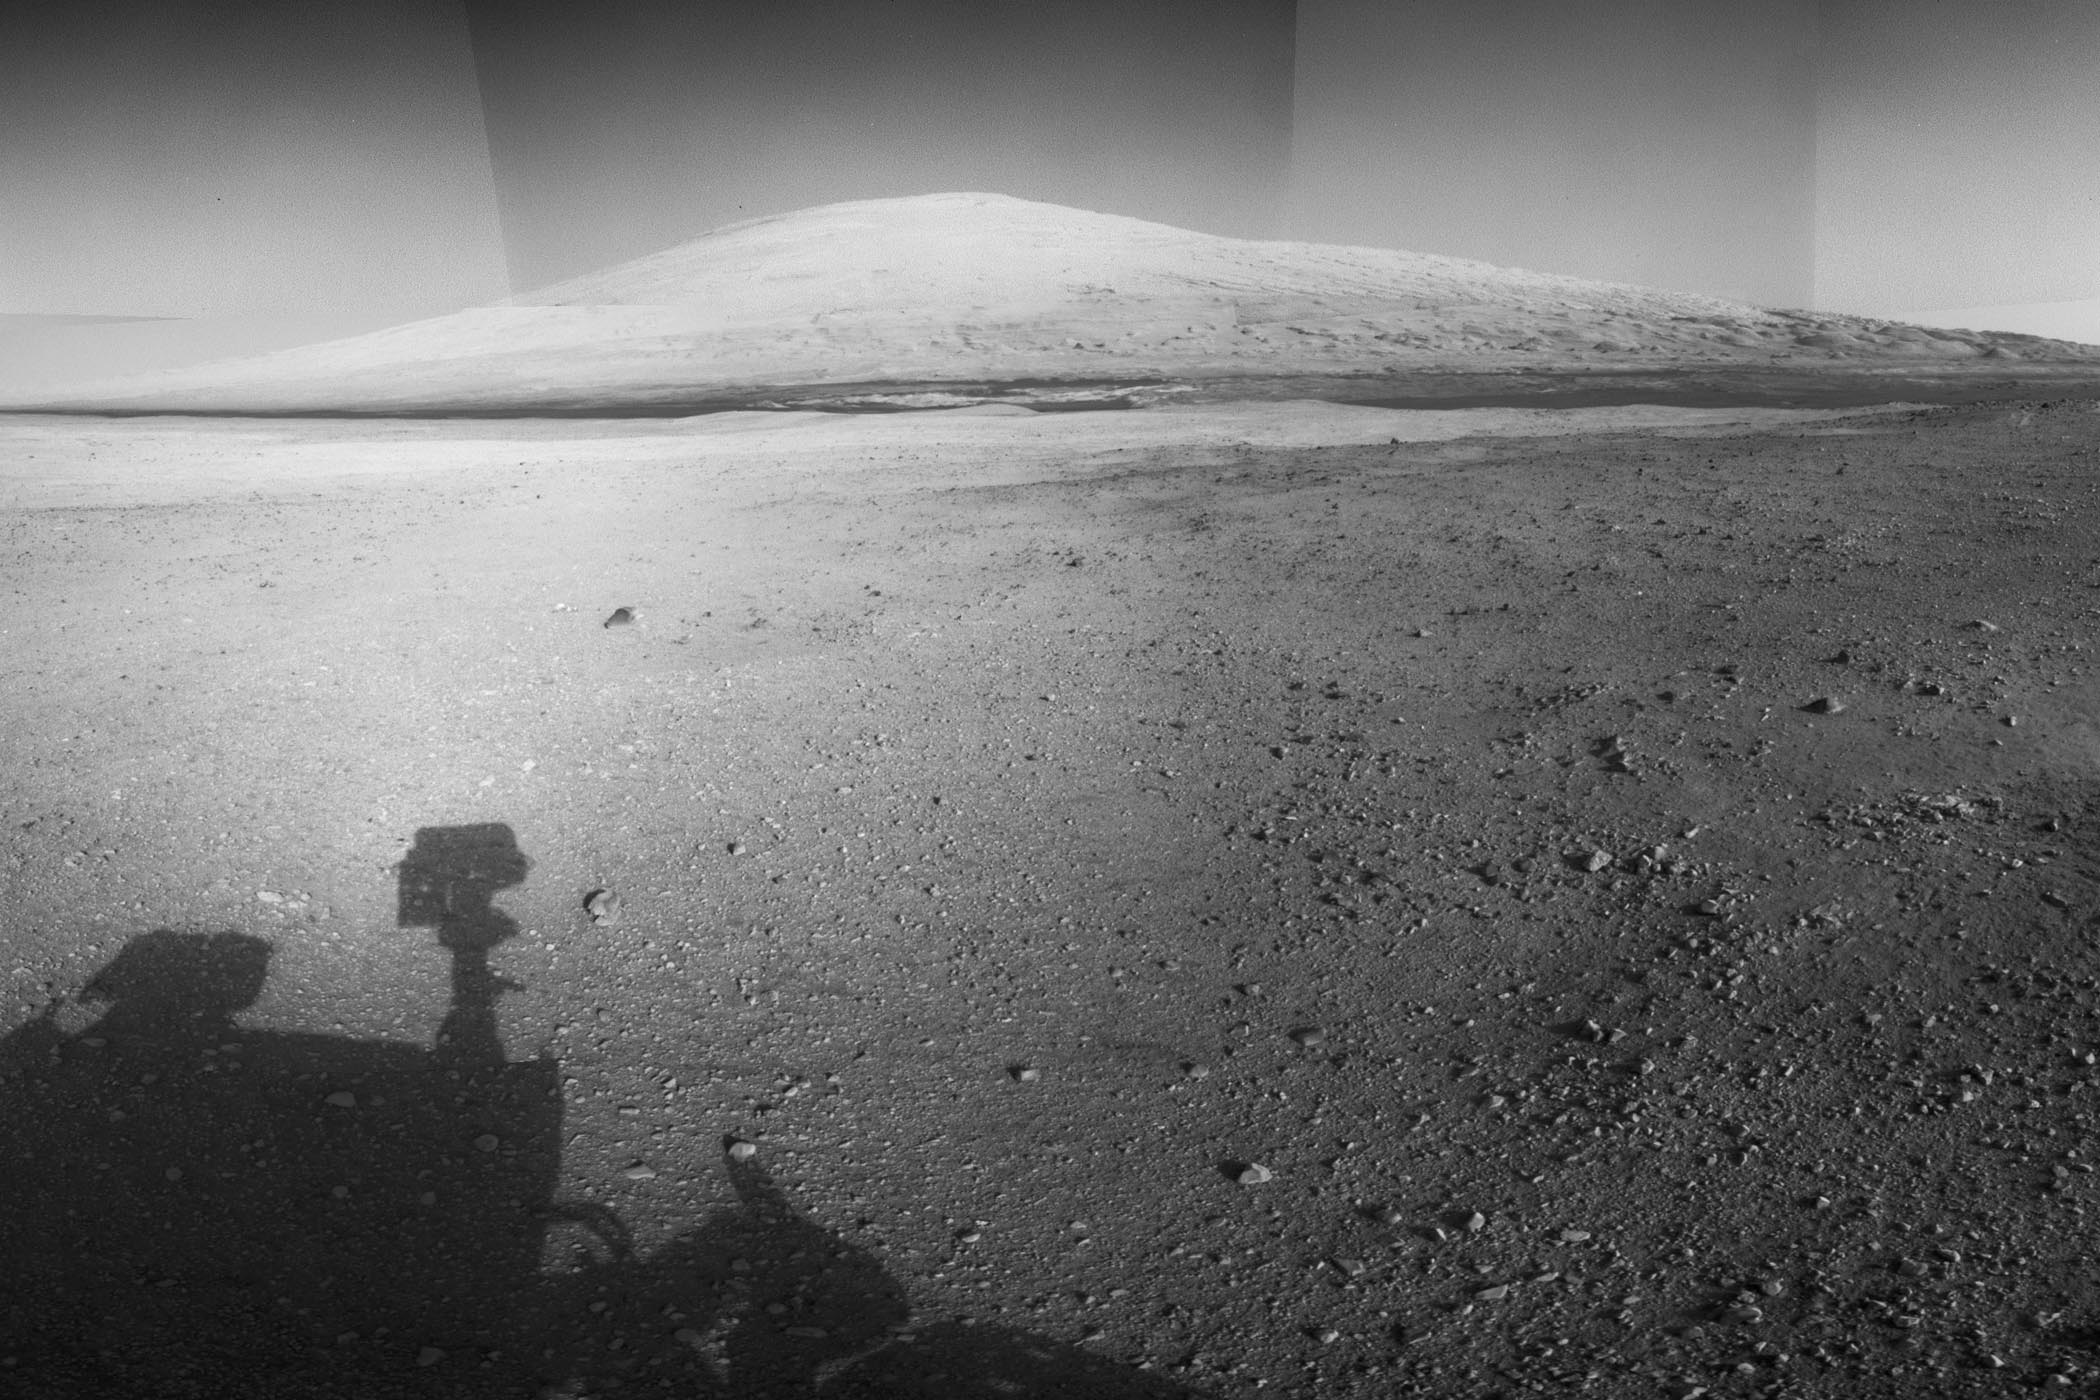 The highest point on Mount Sharp is visible from the Curiosity rover on Aug. 18, 2012. The Martian mountain rises 3.4 miles above the floor of Gale Crater. Geological deposits near the base of Mount Sharp are the destination of Curiosity's Mars mission.